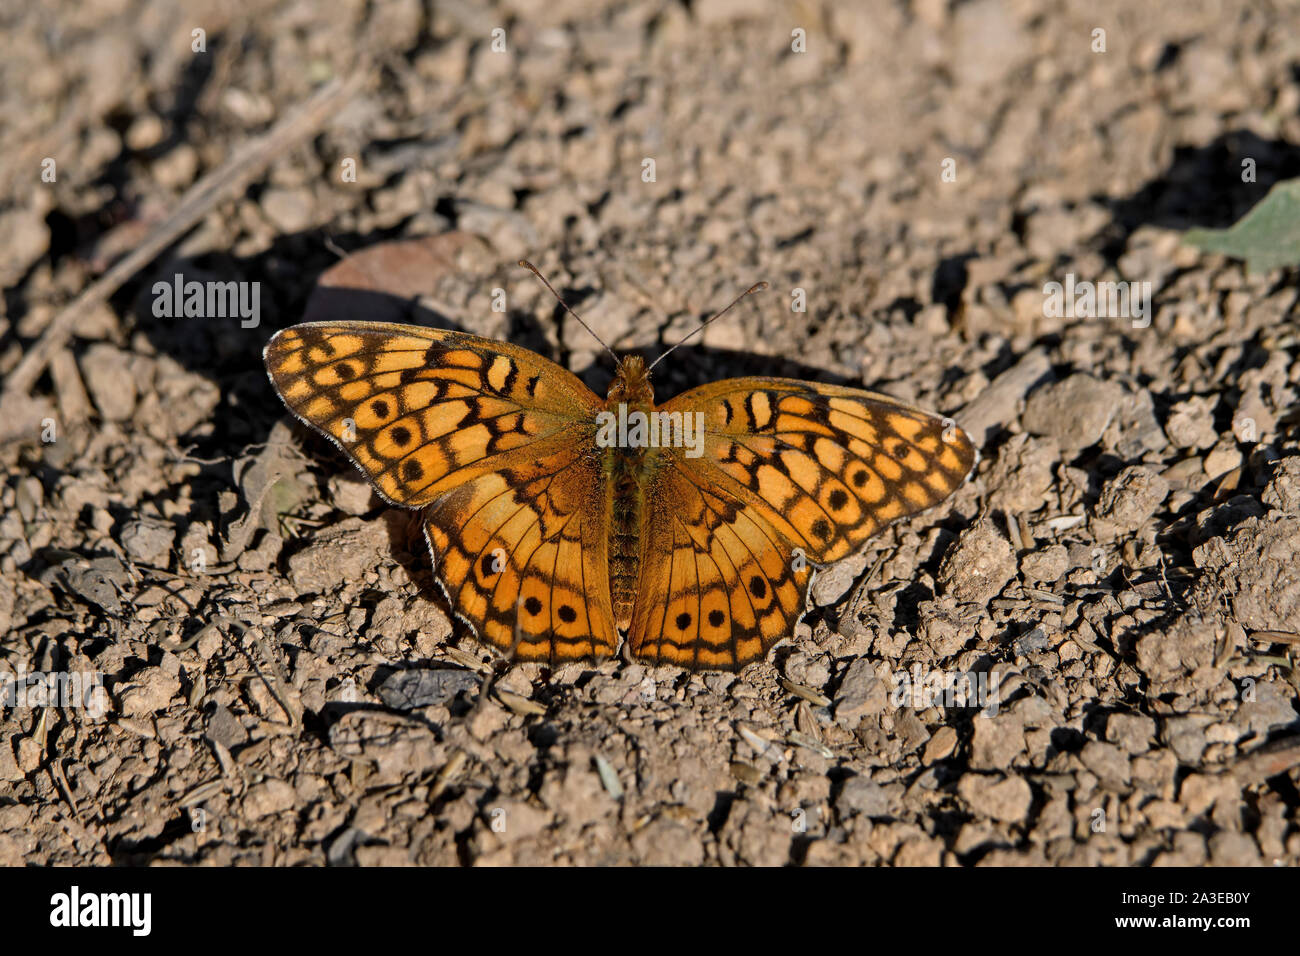 Euptoieta Claudia or variegated fritillary sunning itself o n a bed of pebbles. It is a North and South American butterfly in the family Nymphalidae. Stock Photo